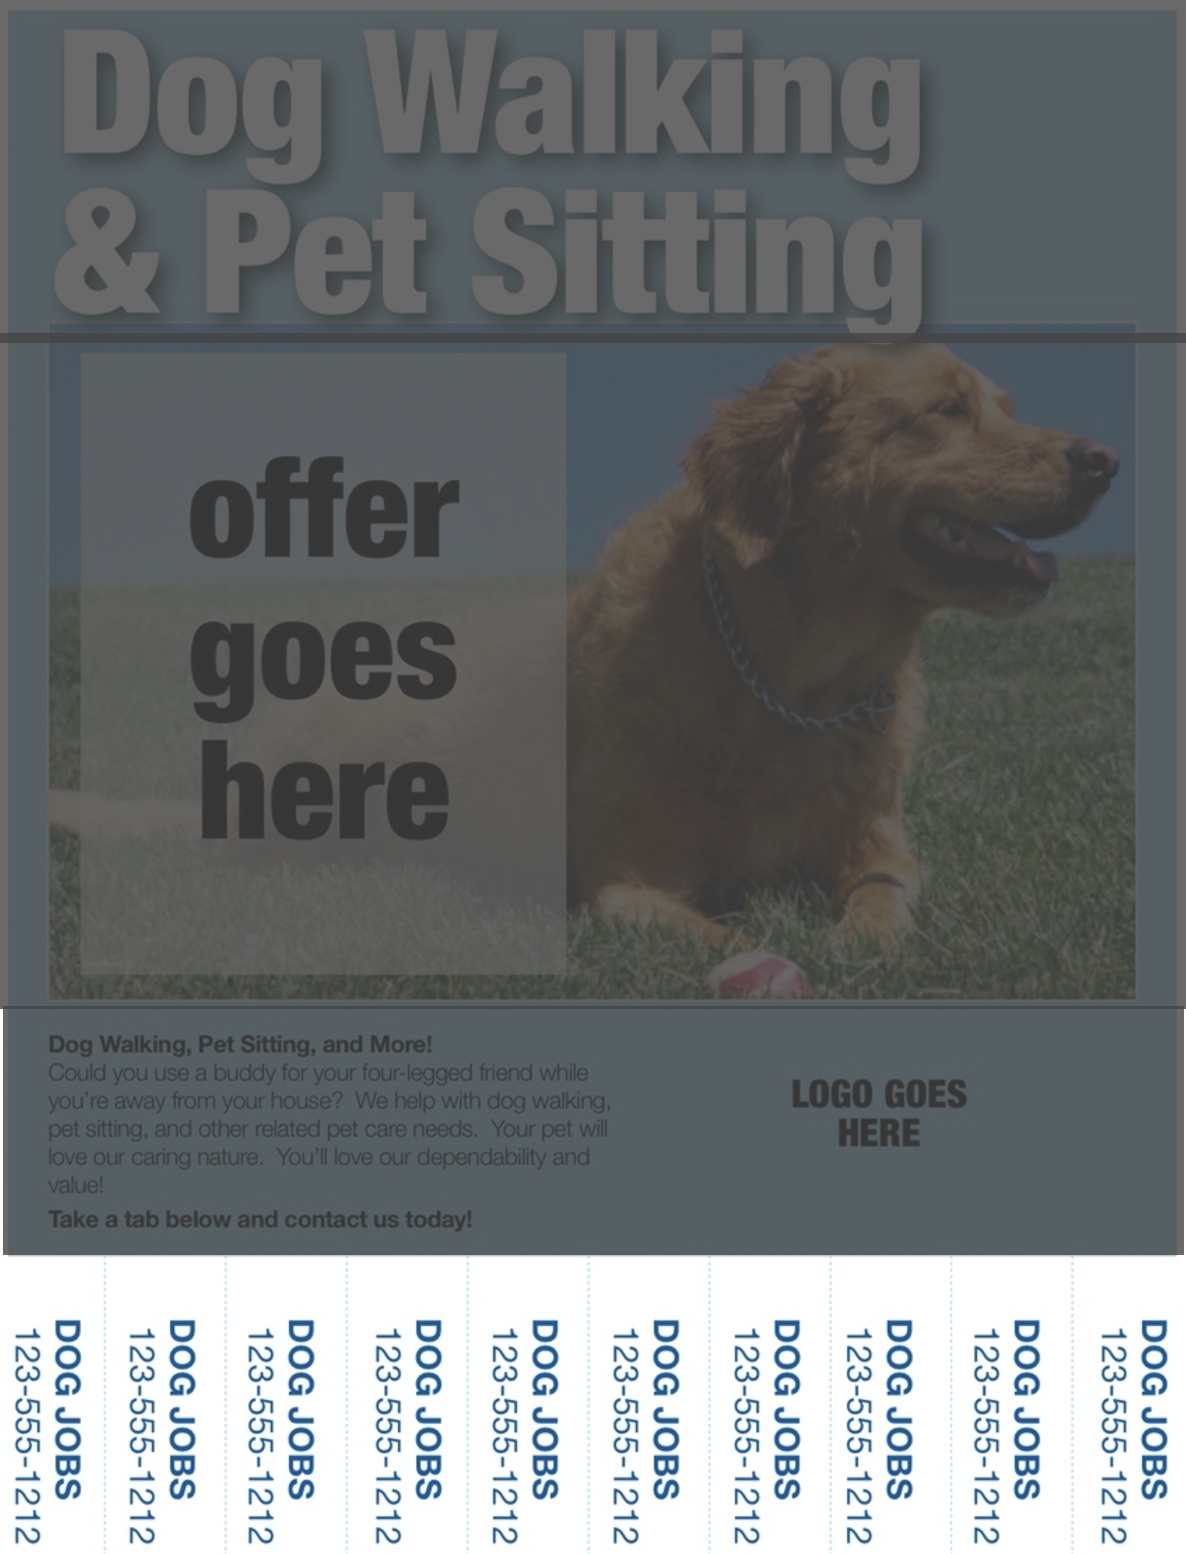 dog walking flyers contact information